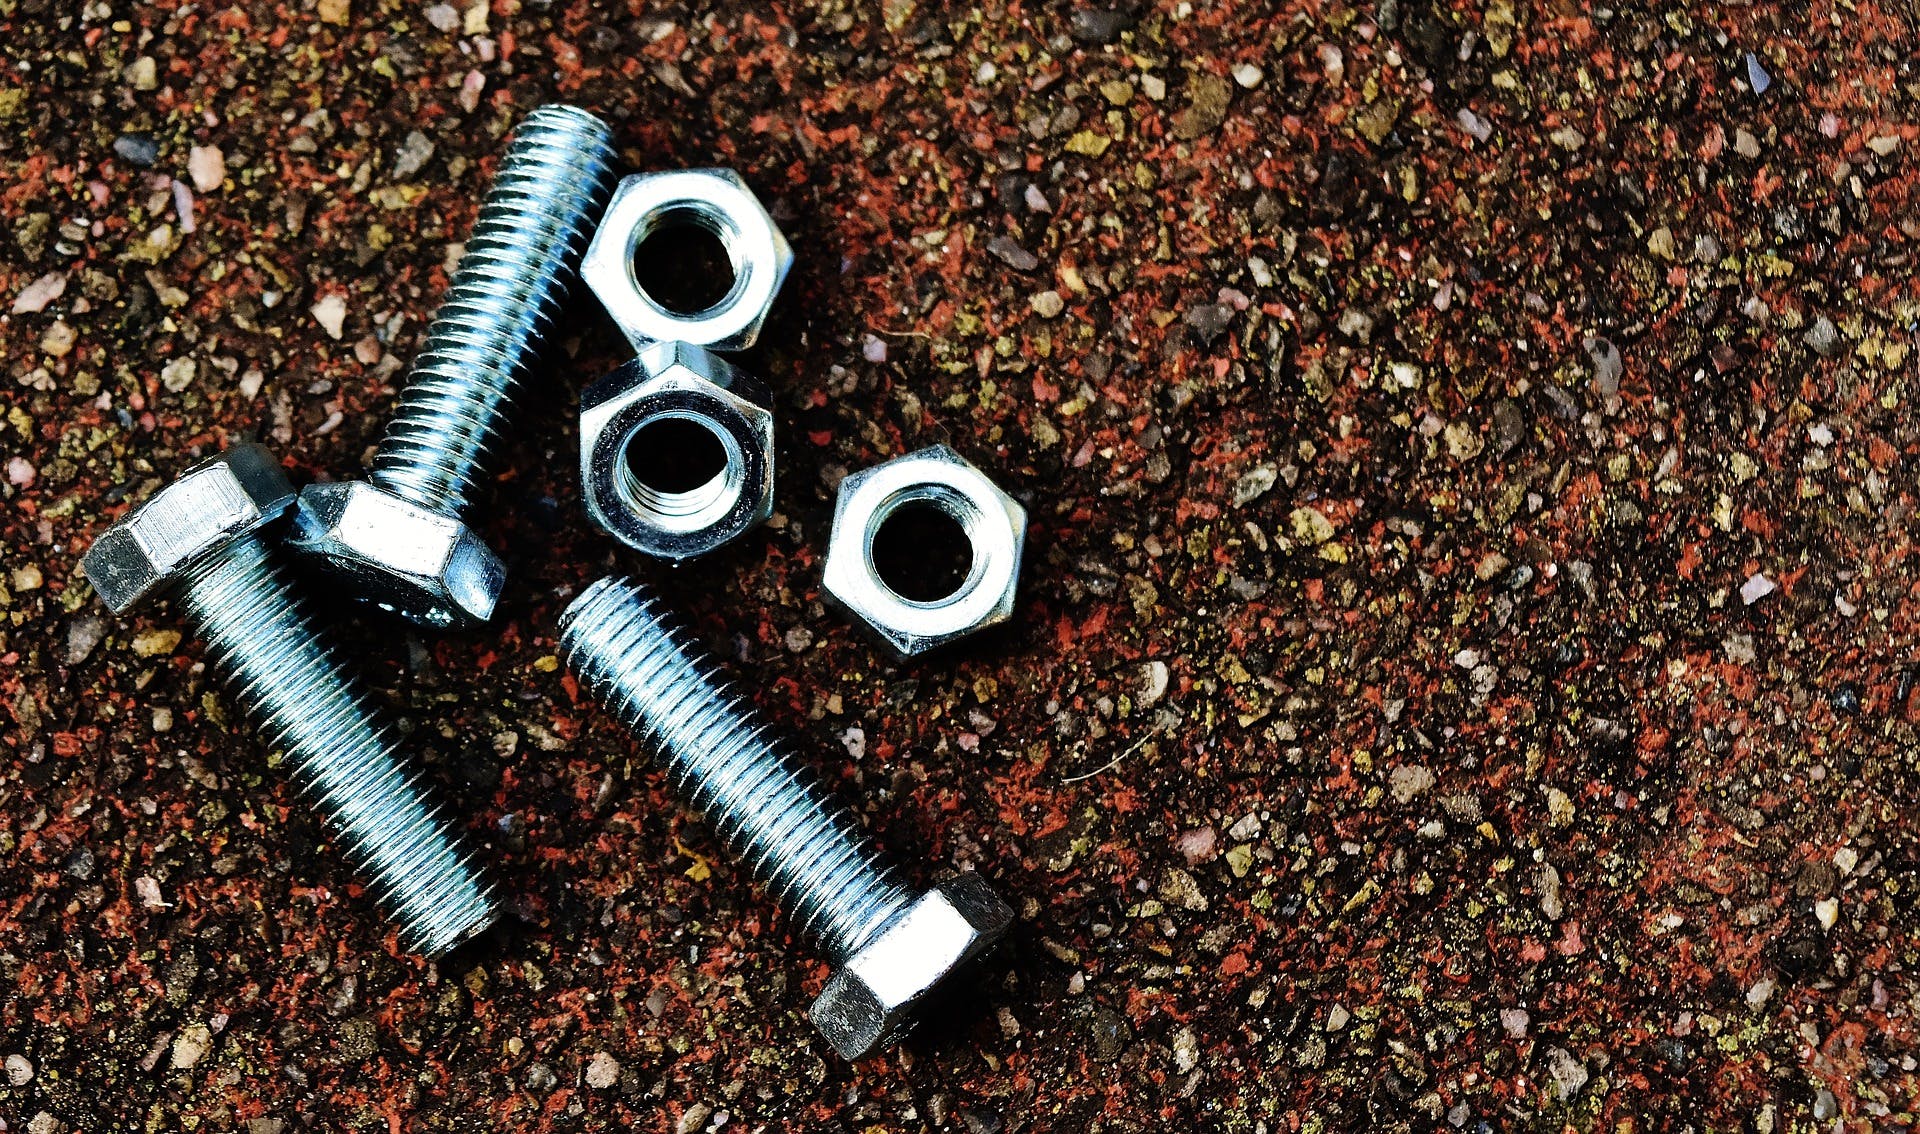 Tempered steel nuts and bolts